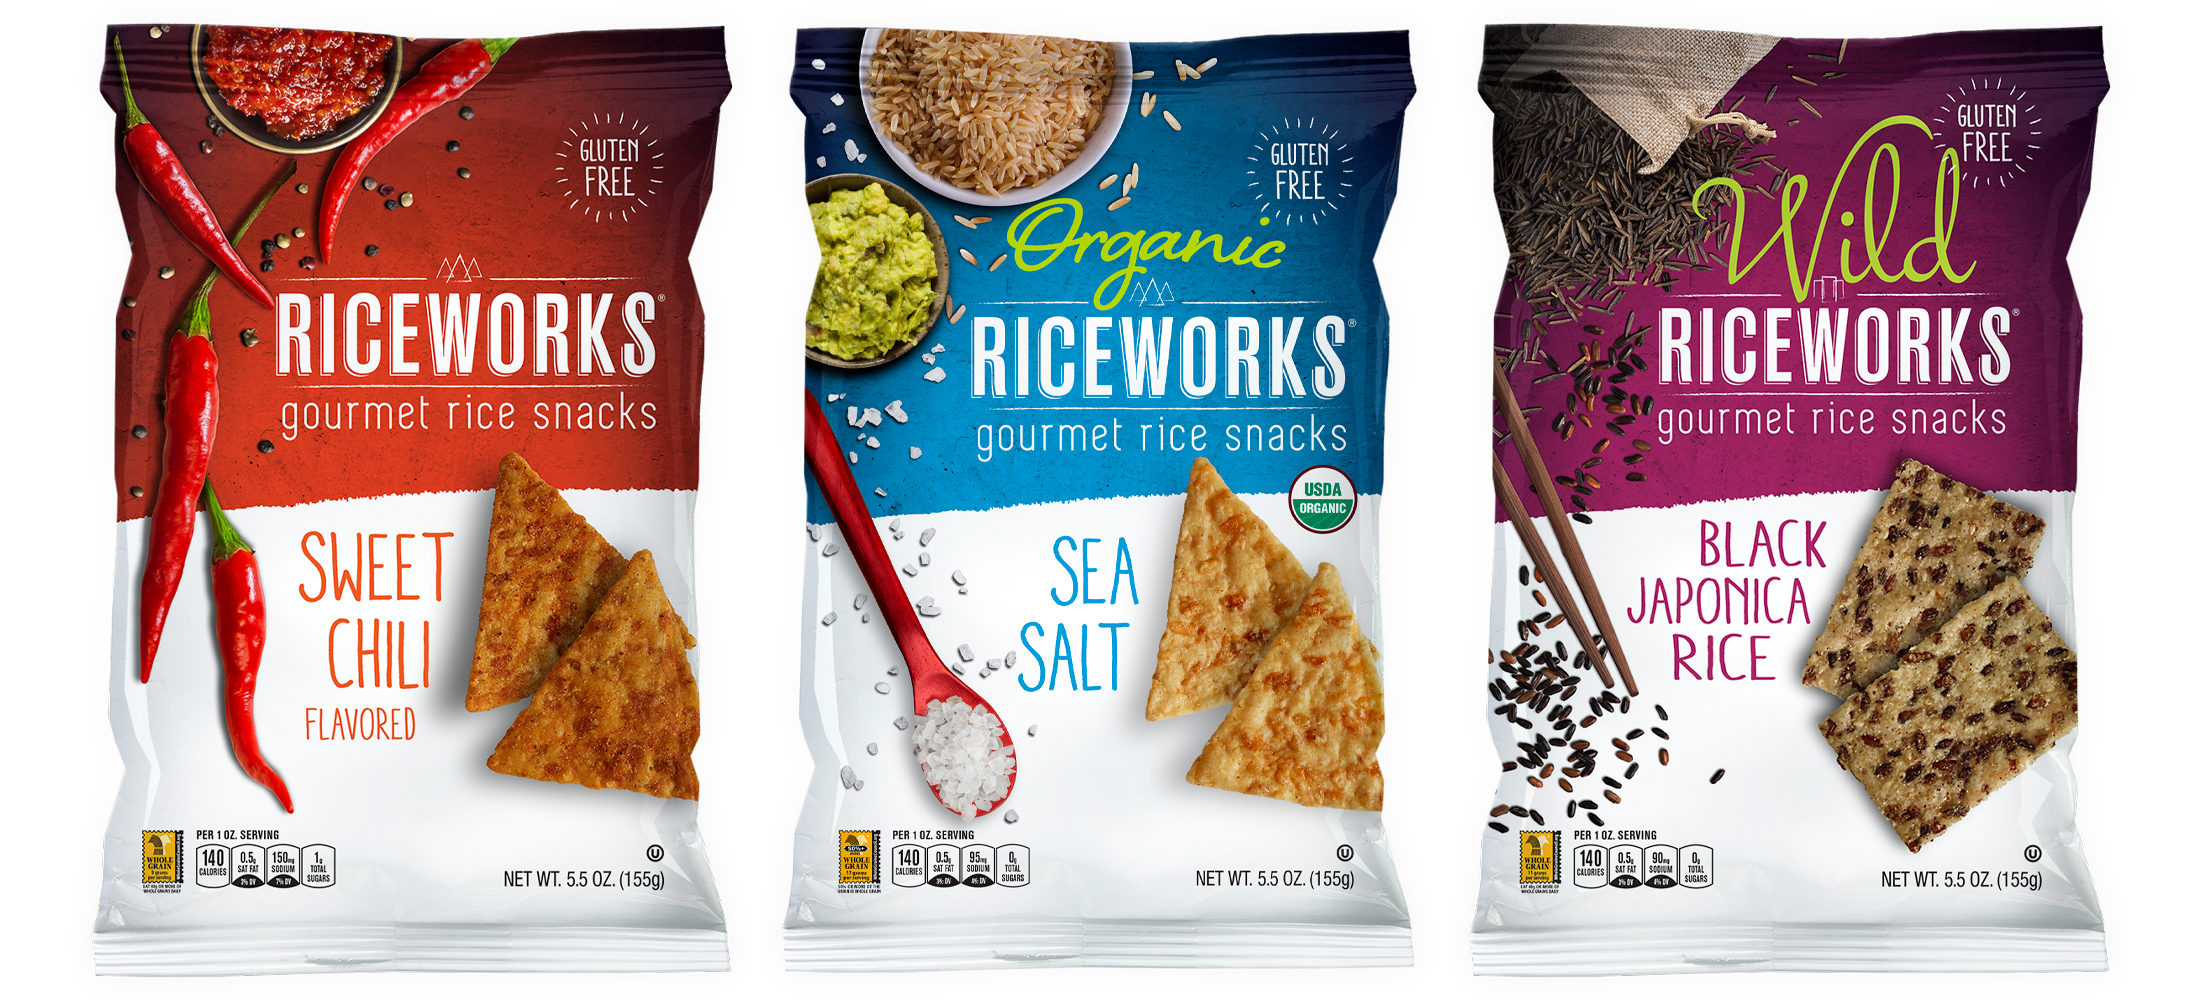 Riceworks rice chips packaging